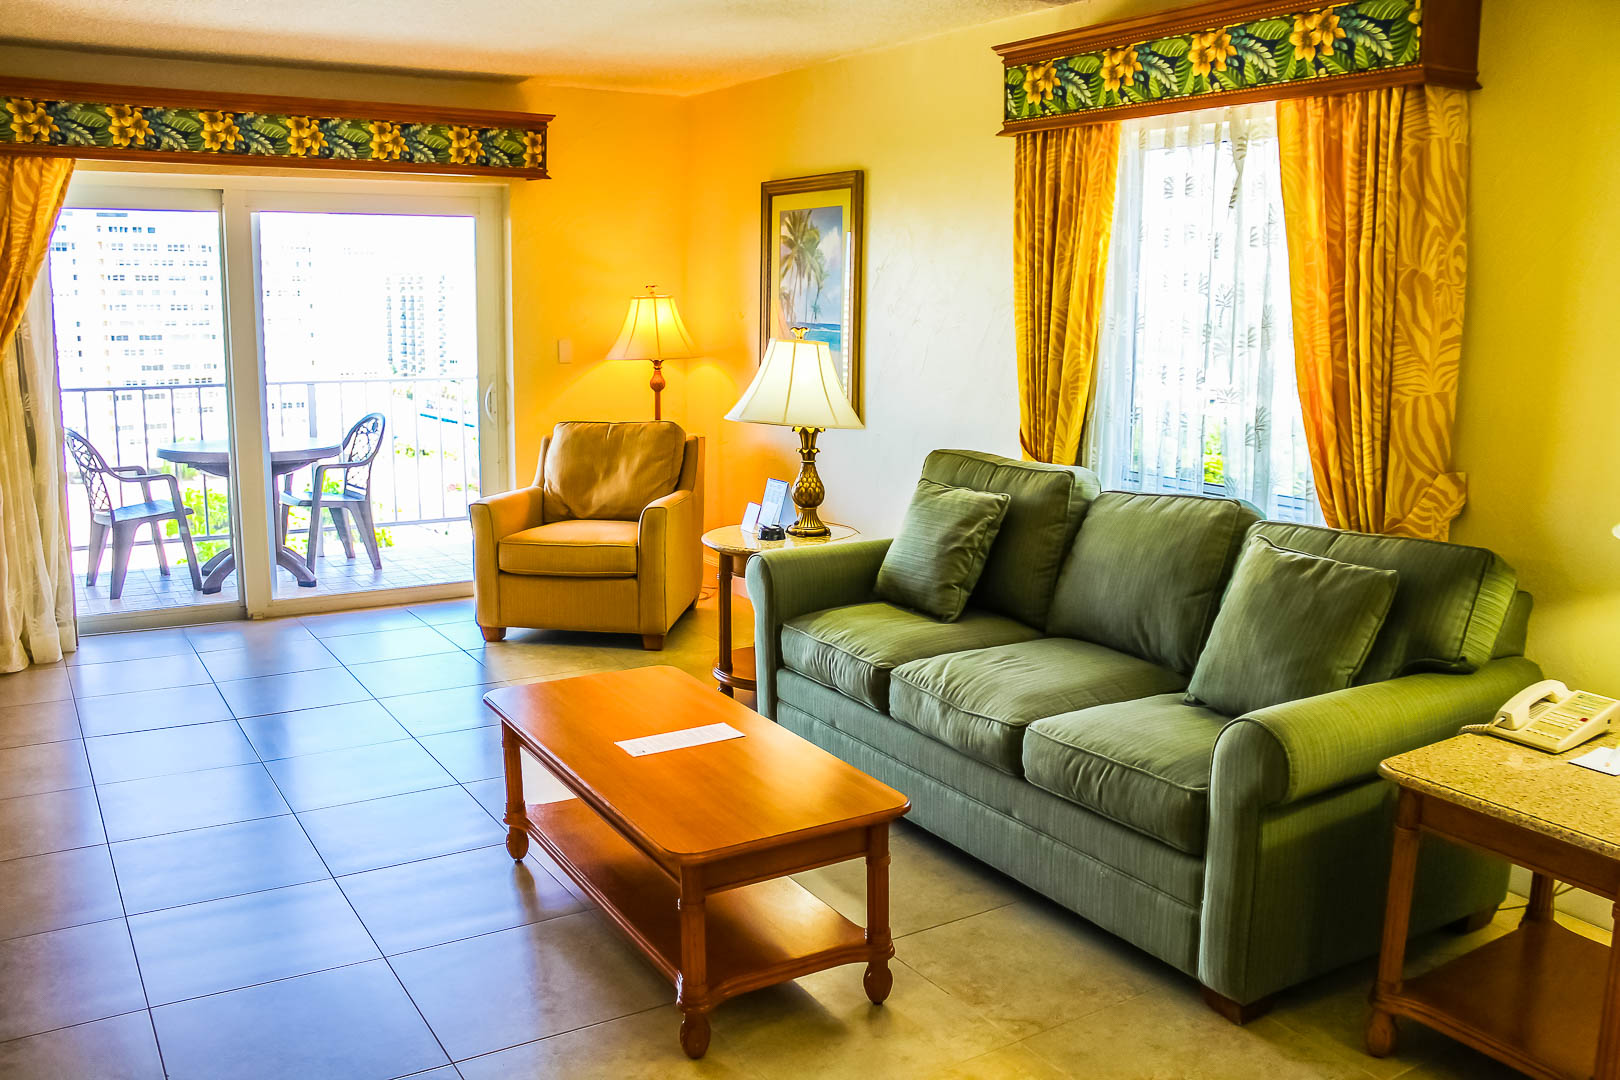 A vibrant living room at VRI's Ft. Lauderdale Beach Resort in Florida.